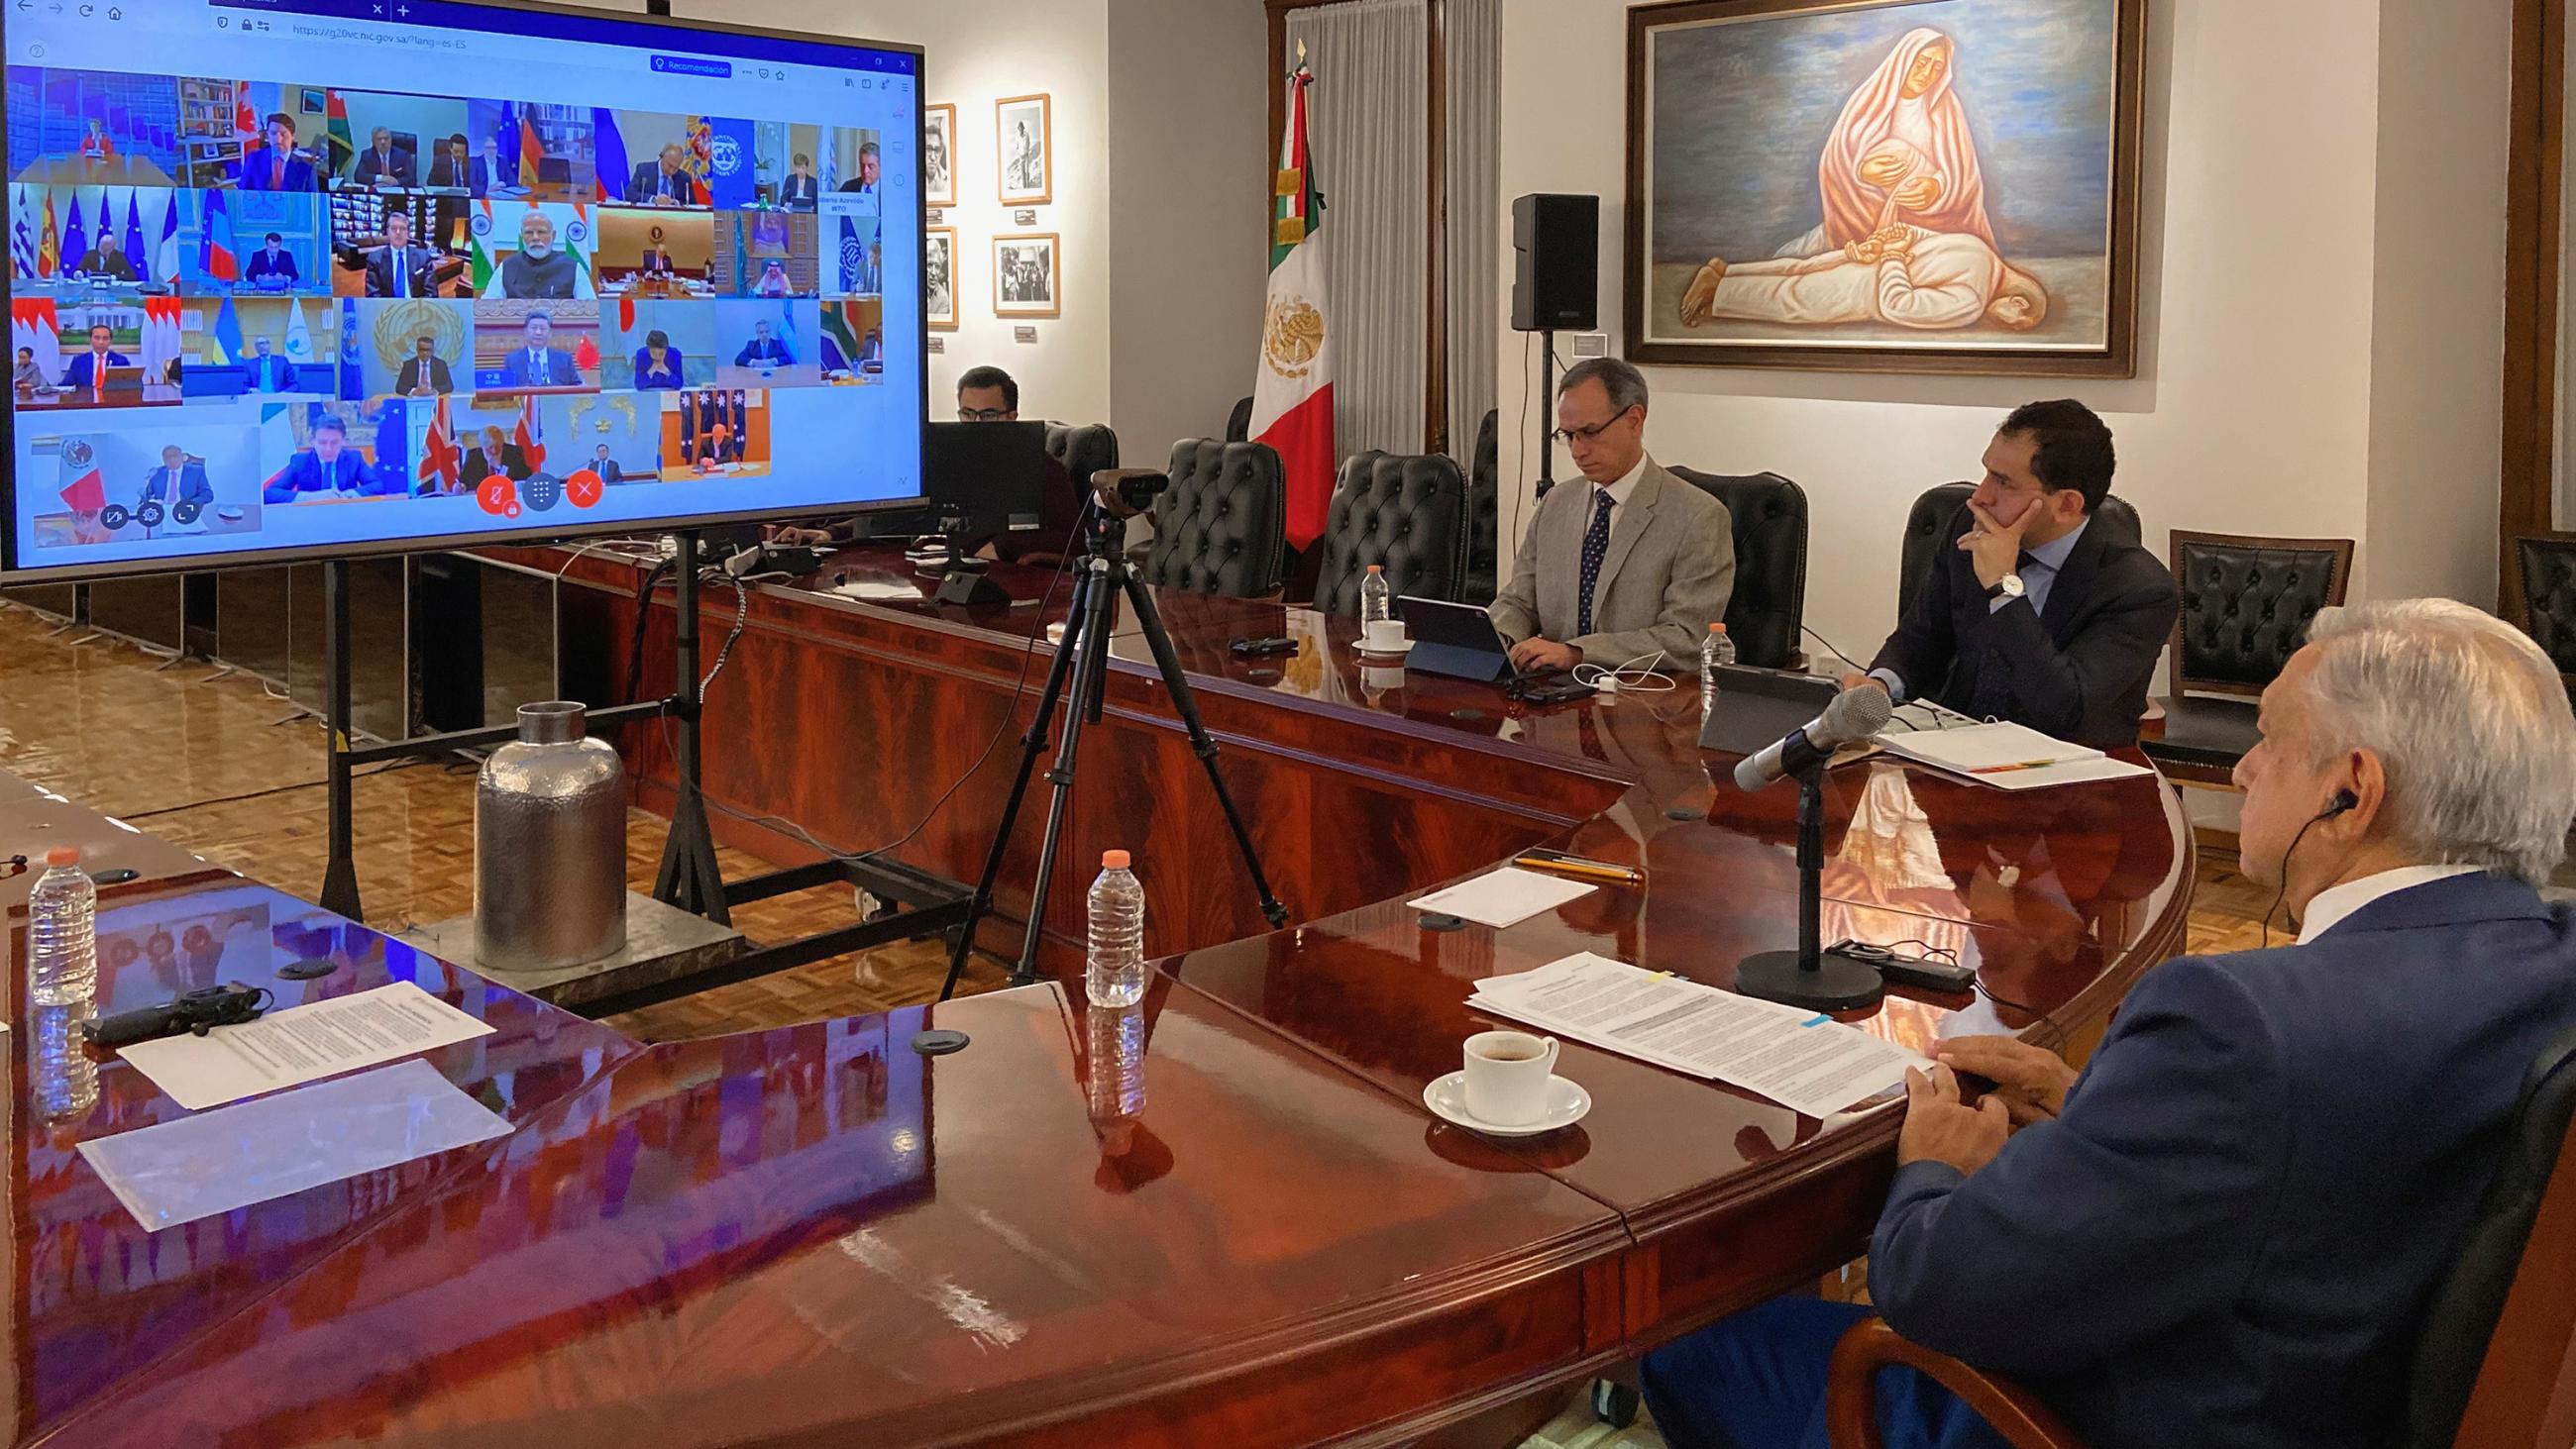 The photo shows the president in a room with a large monitor and several other people sitting nearby. 